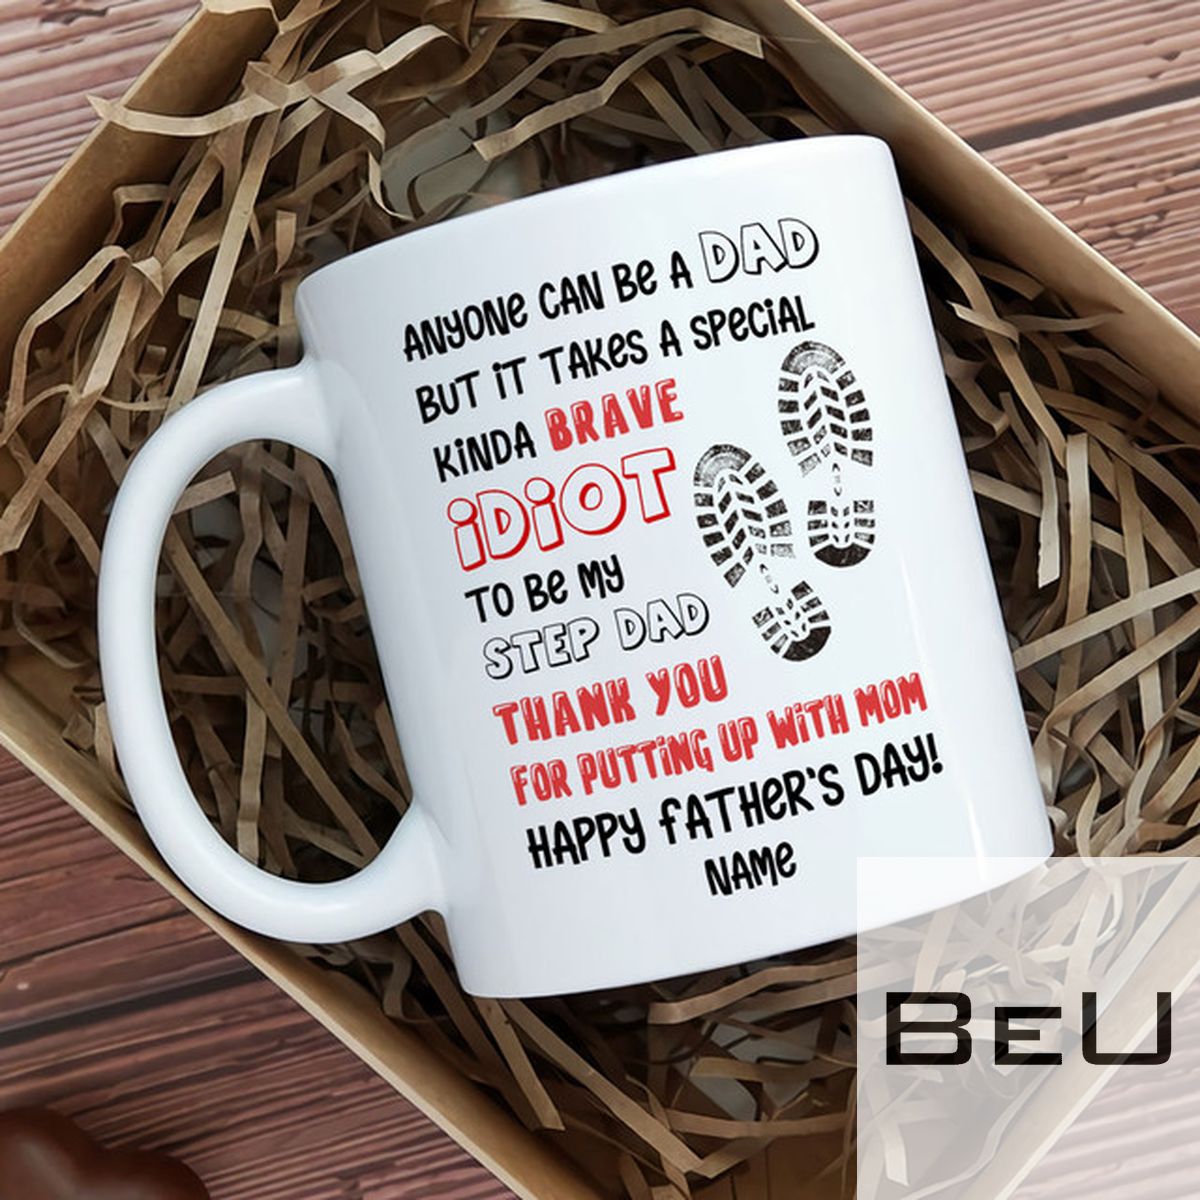 Personalized Anyone Can Be A Dad But It Takes A Special Kinda Brave Idiot To Be My Step Dad Happy Father's Day Mug